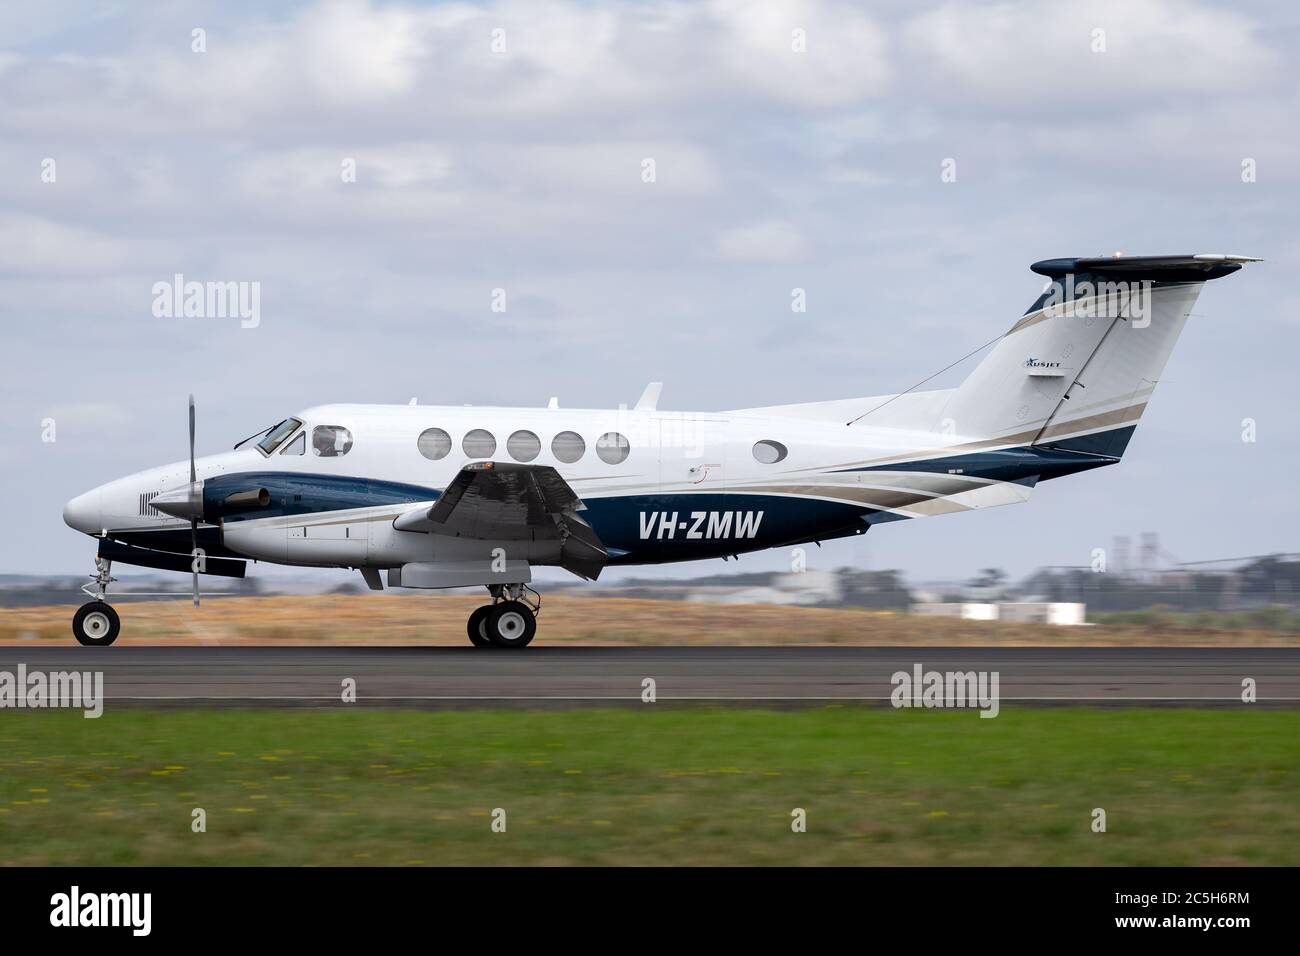 Beech B200 Super King Air twin engine turboprop aircraft on the runway at Avalon aIrport. Stock Photo